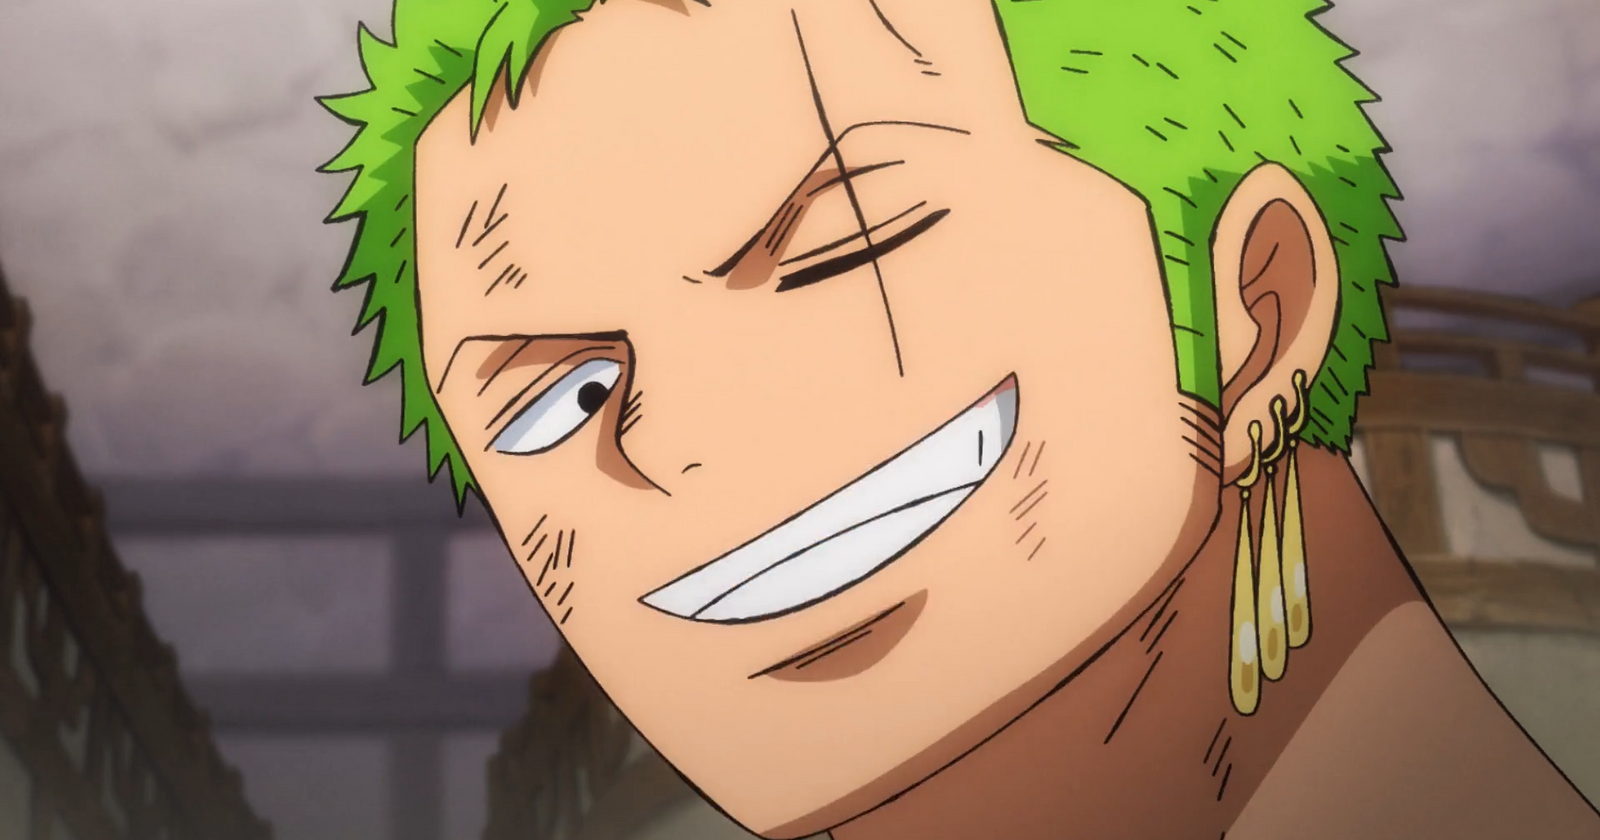 One Piece Episode 1010: Zoro Has No Time for Games - Anime Corner